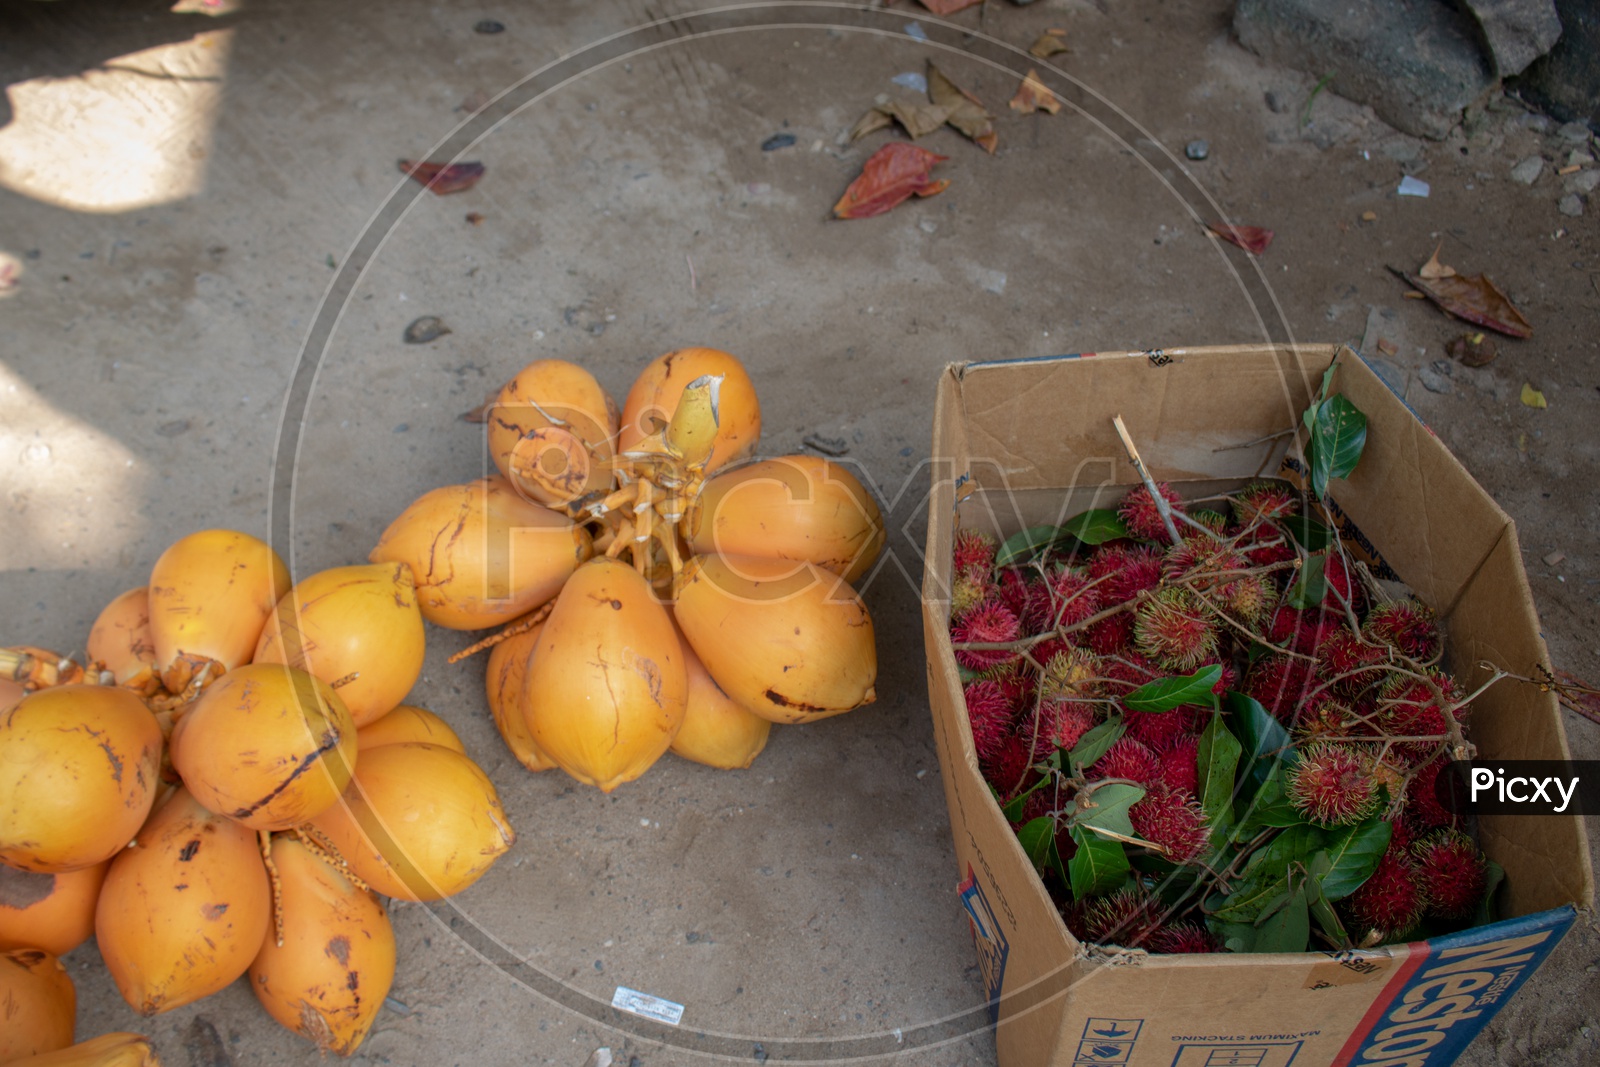 King Coconuts and Rambutans being sold on streets.